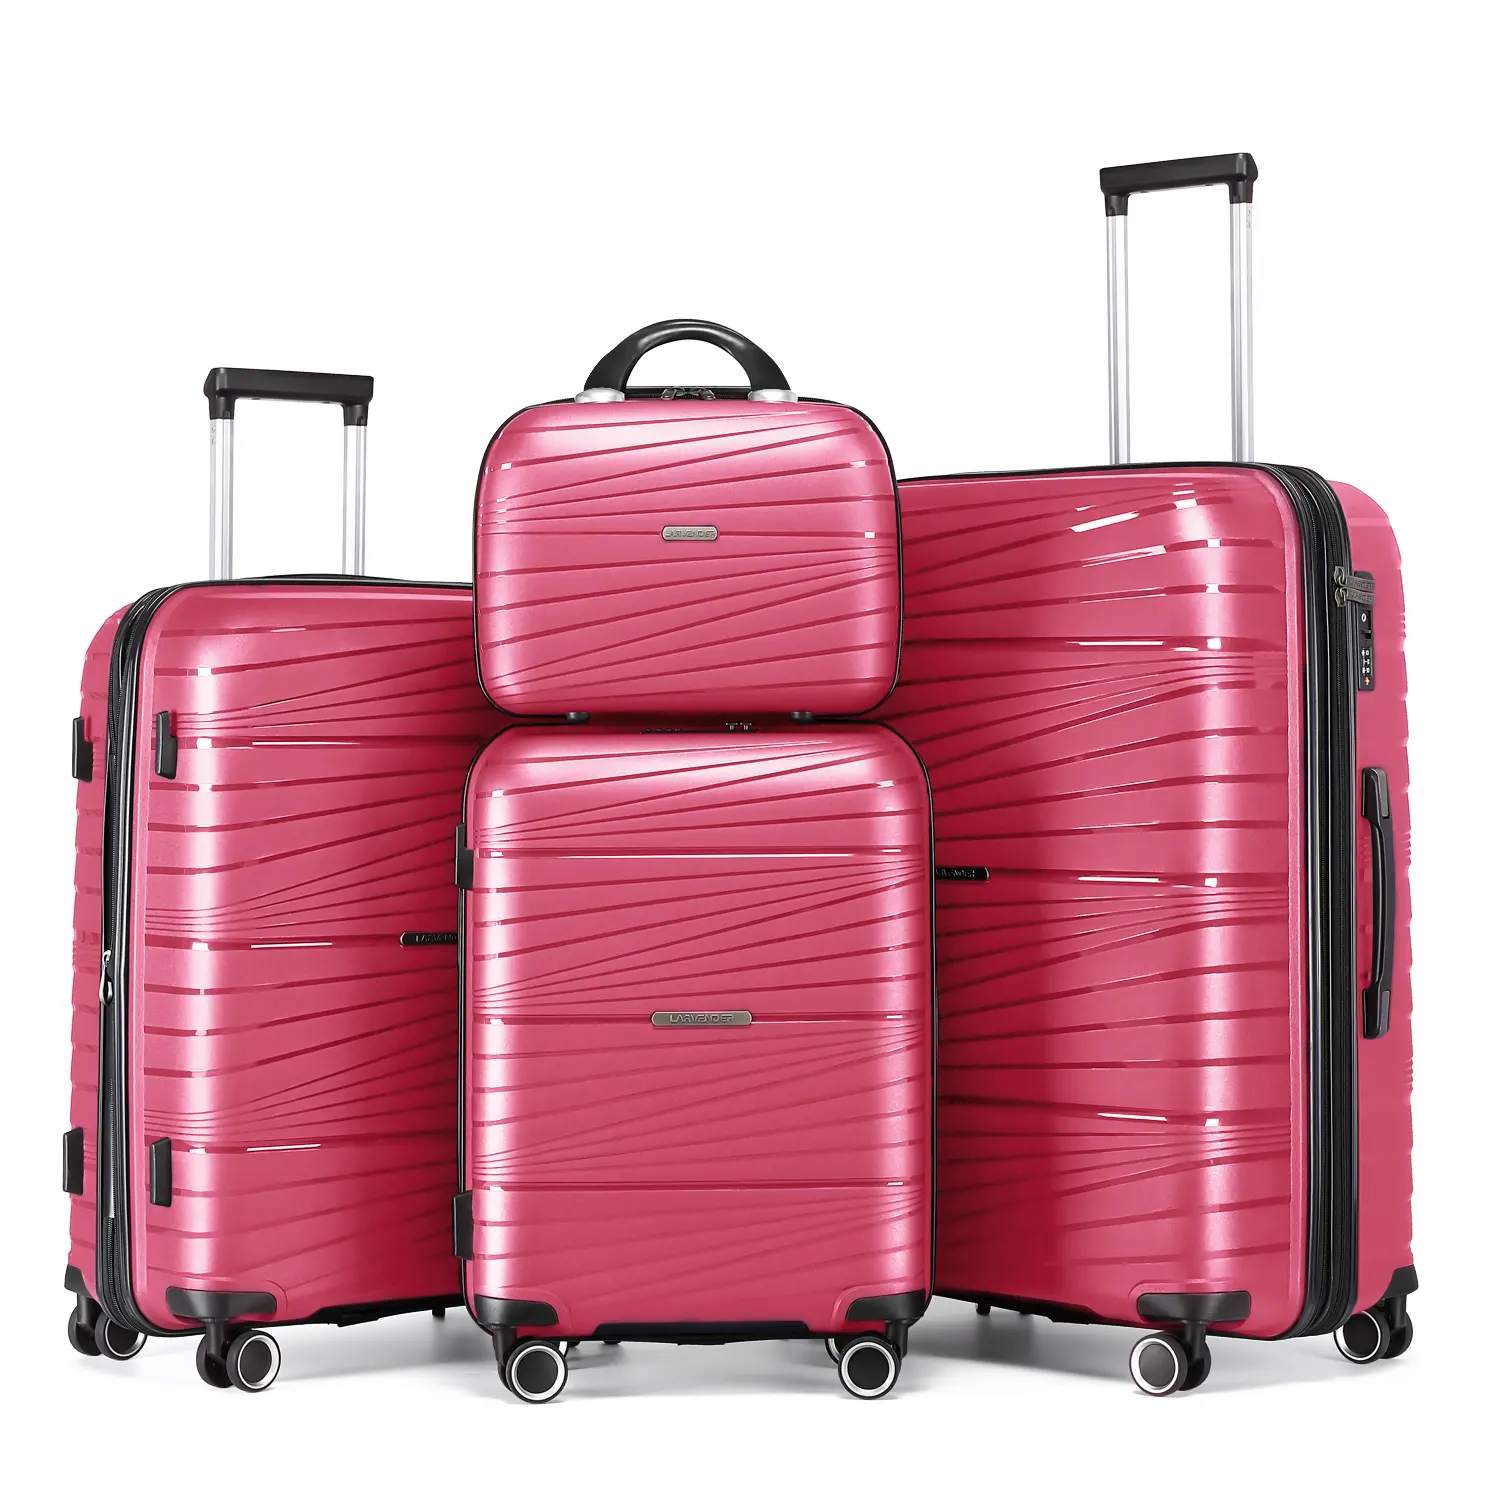 Factory Stock 4-Piece PP Suitcase Set Travel Hard Trolley Bags with Wheels Sizes 14 20 24 28 Inch